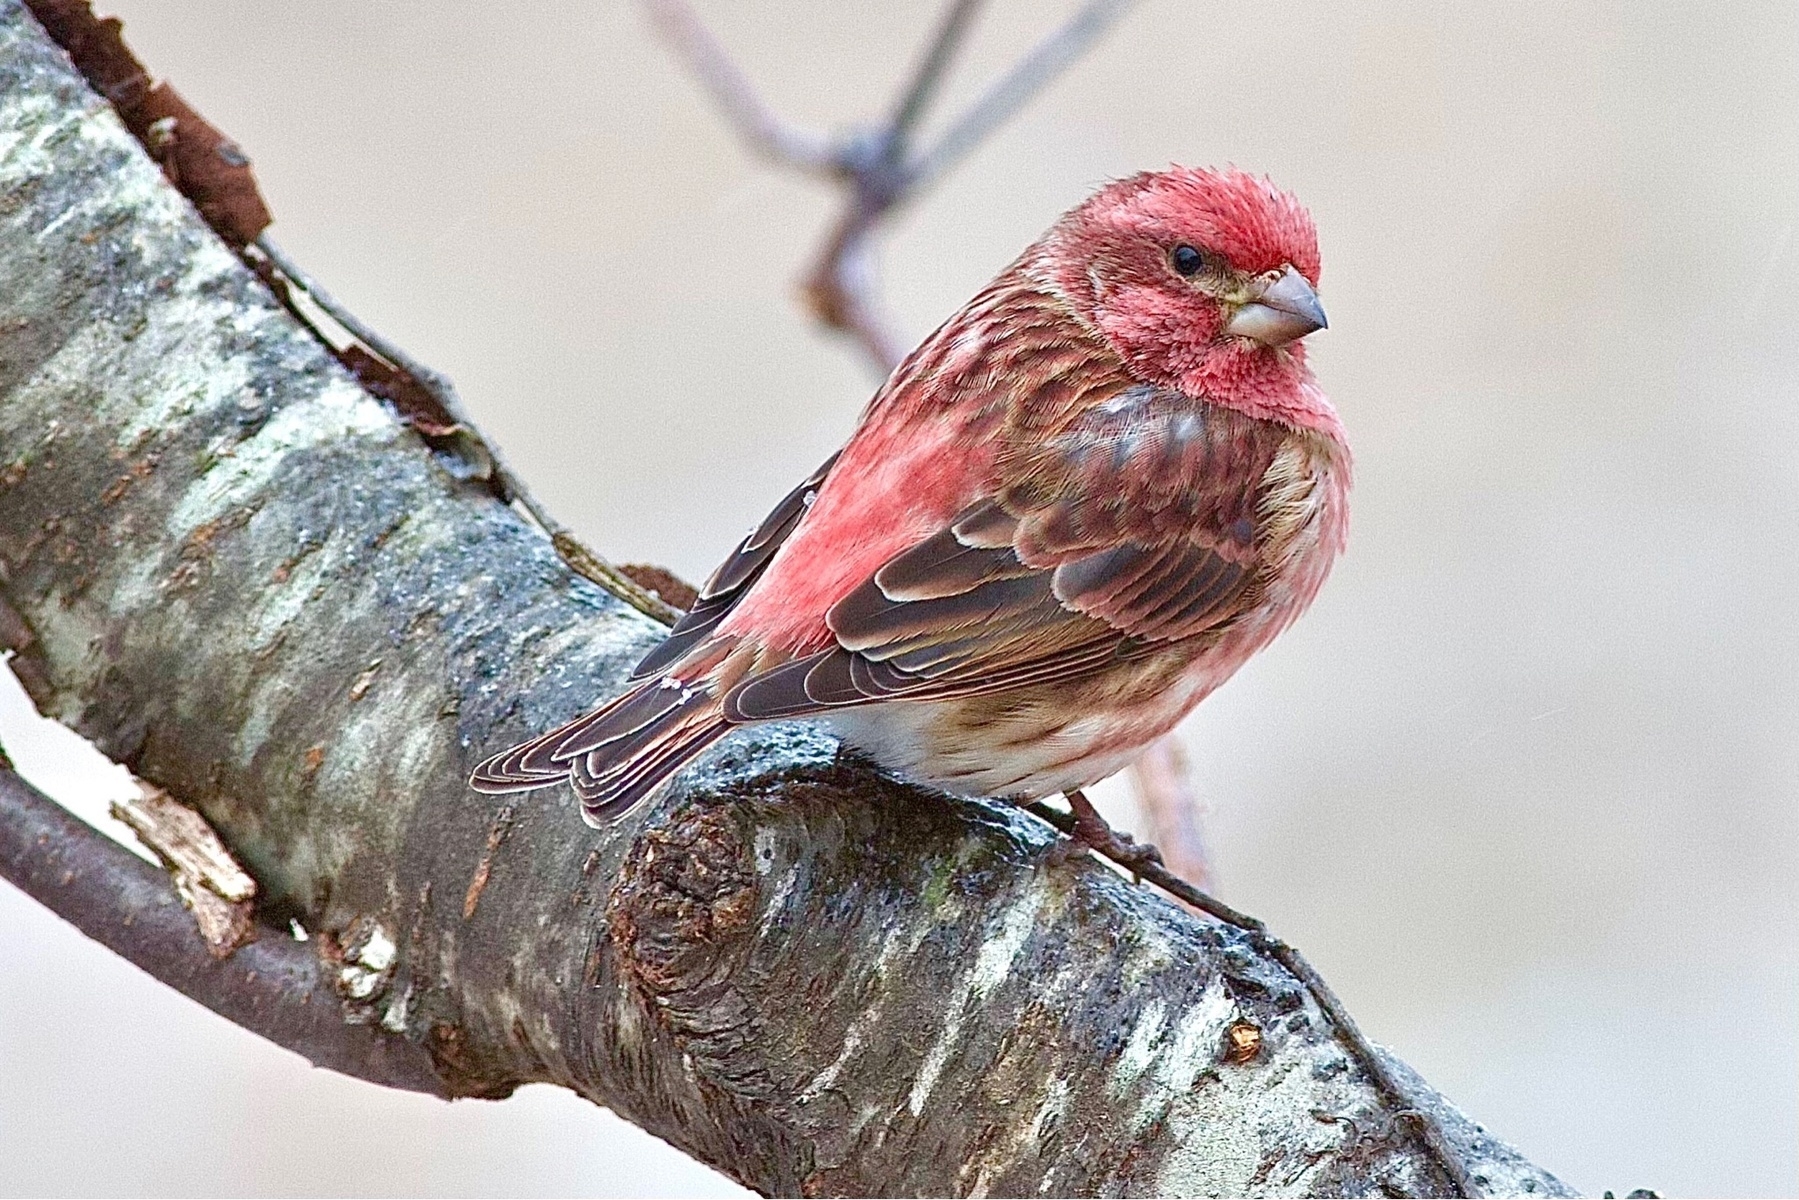 A small purple, rose colored bird is perched on a branch set against blurred winter background 